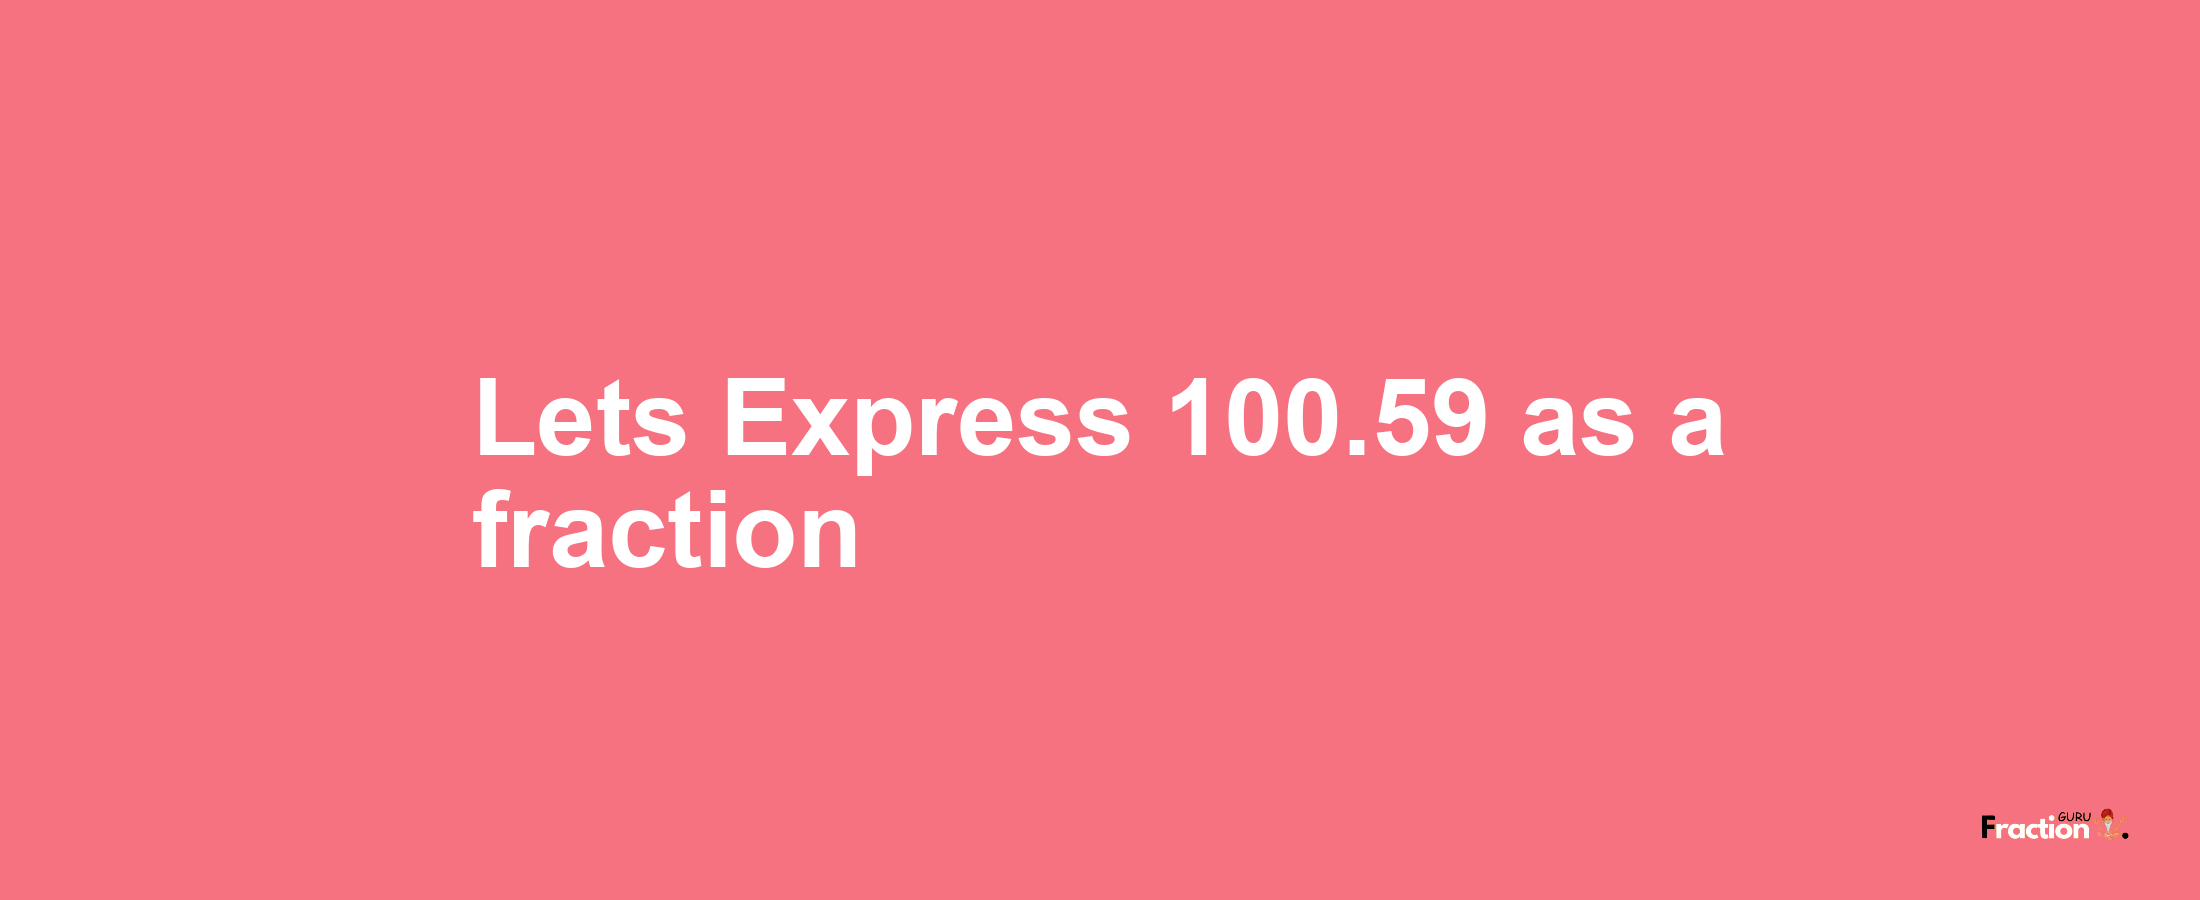 Lets Express 100.59 as afraction